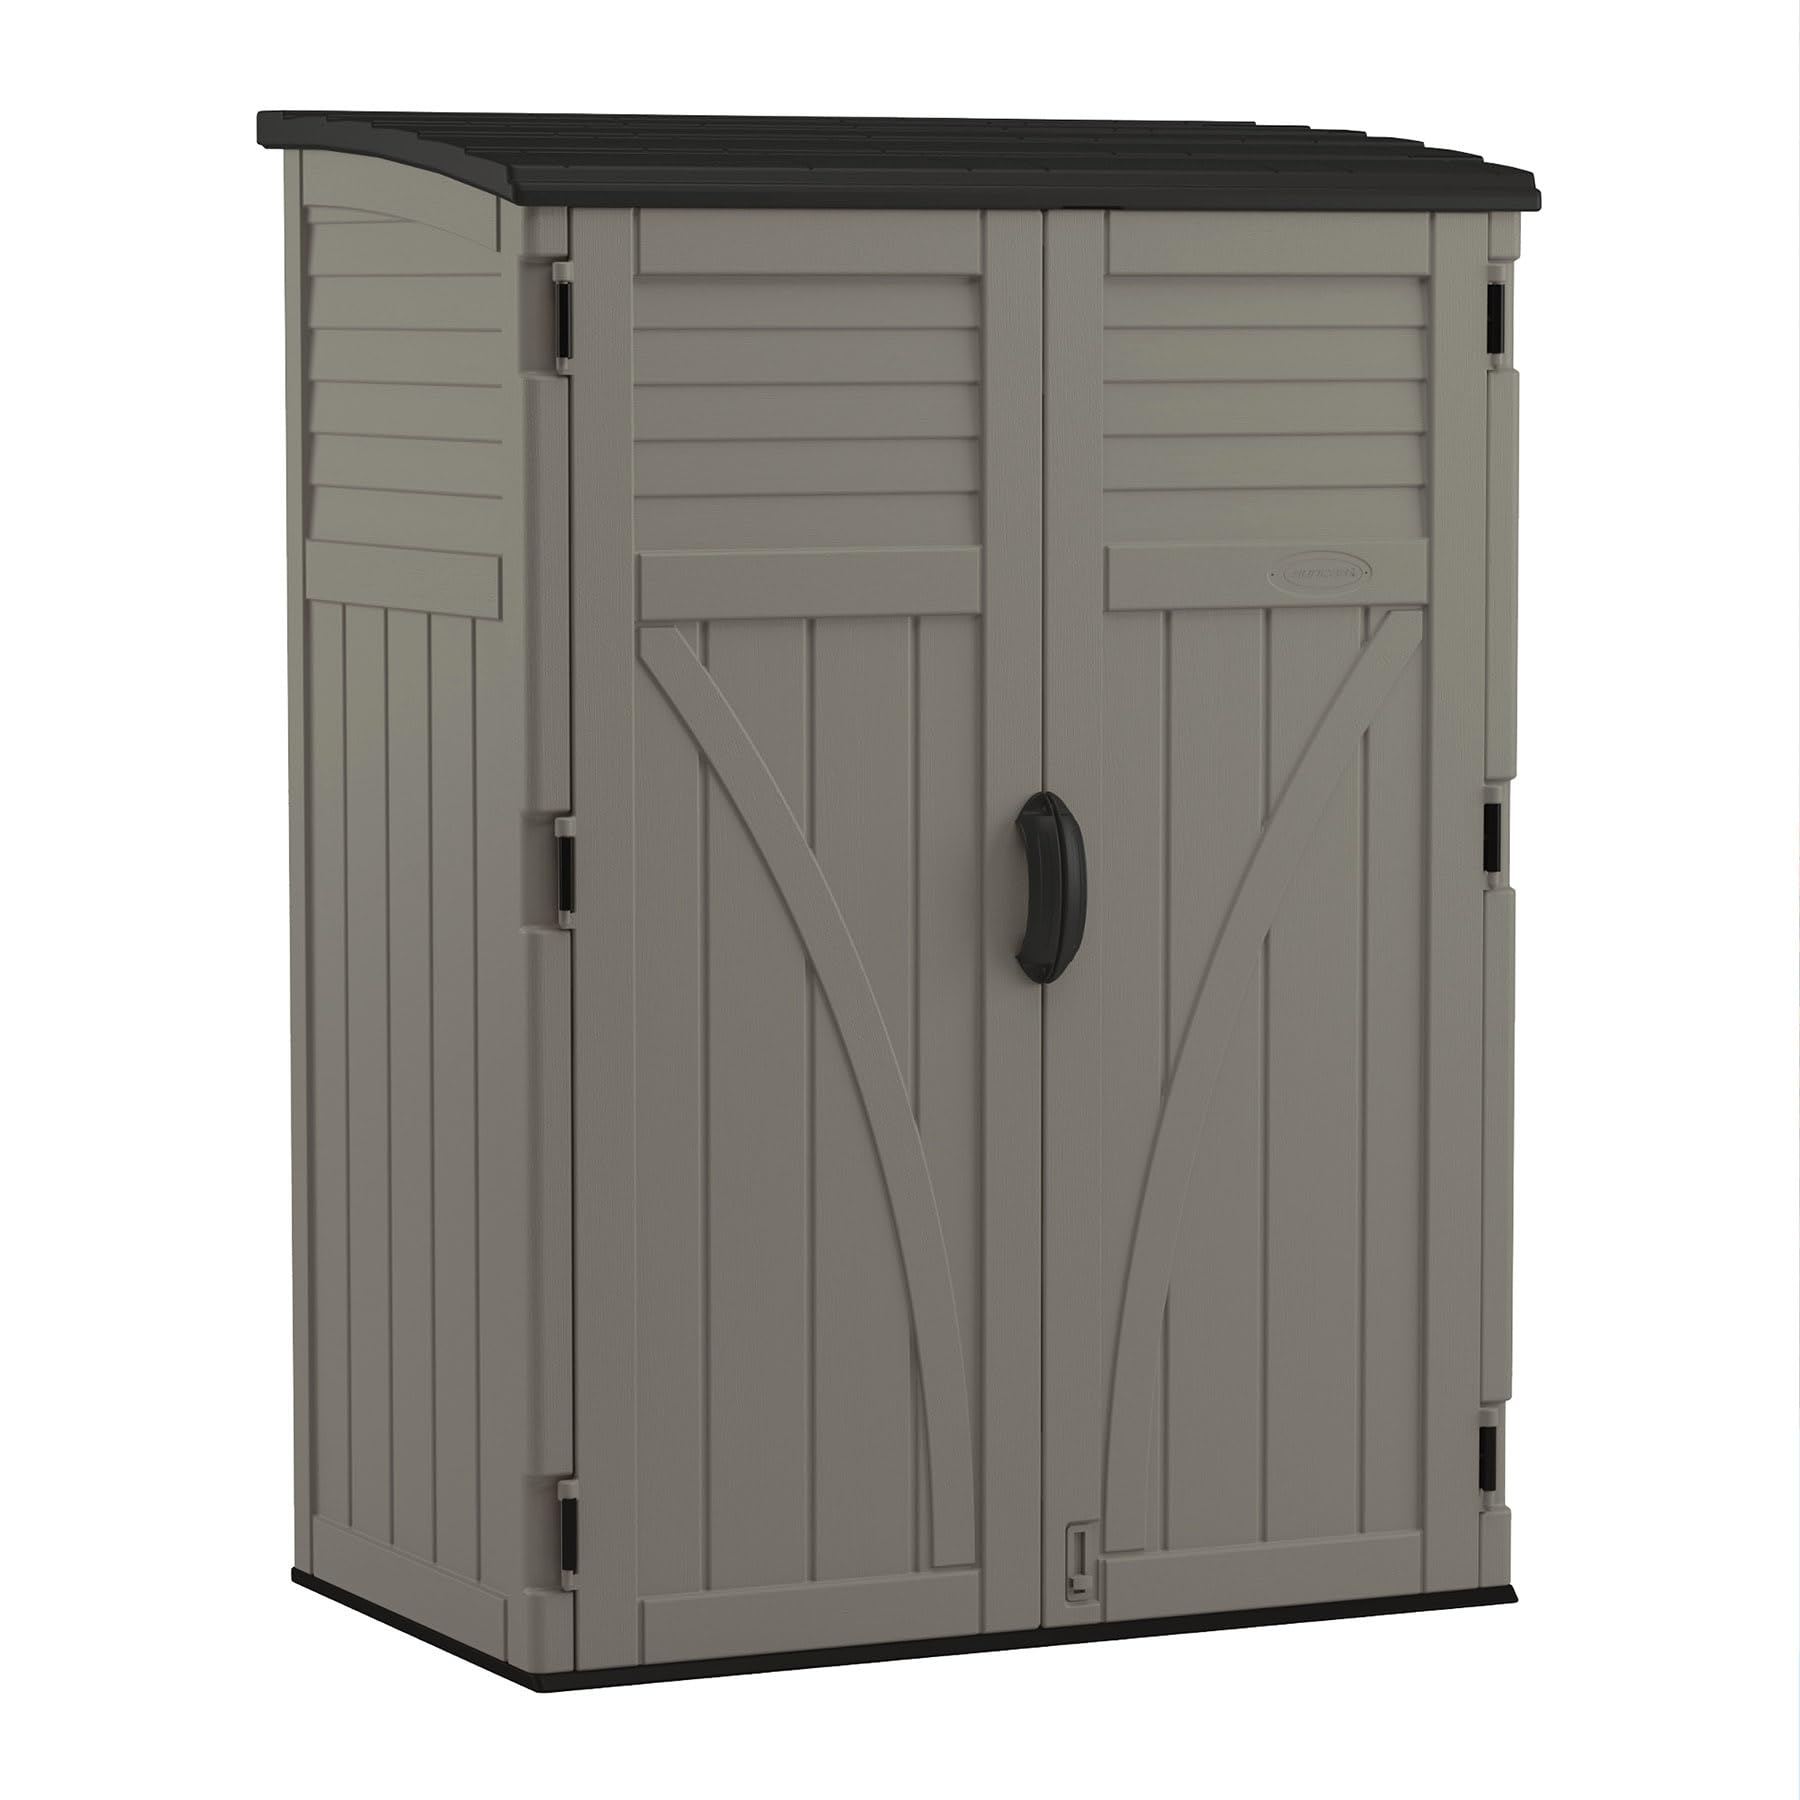 Suncast Resin Vertical Lockable Storage Shed (32.5"D x 41"W x 71.5"H) $245 + Free Shipping